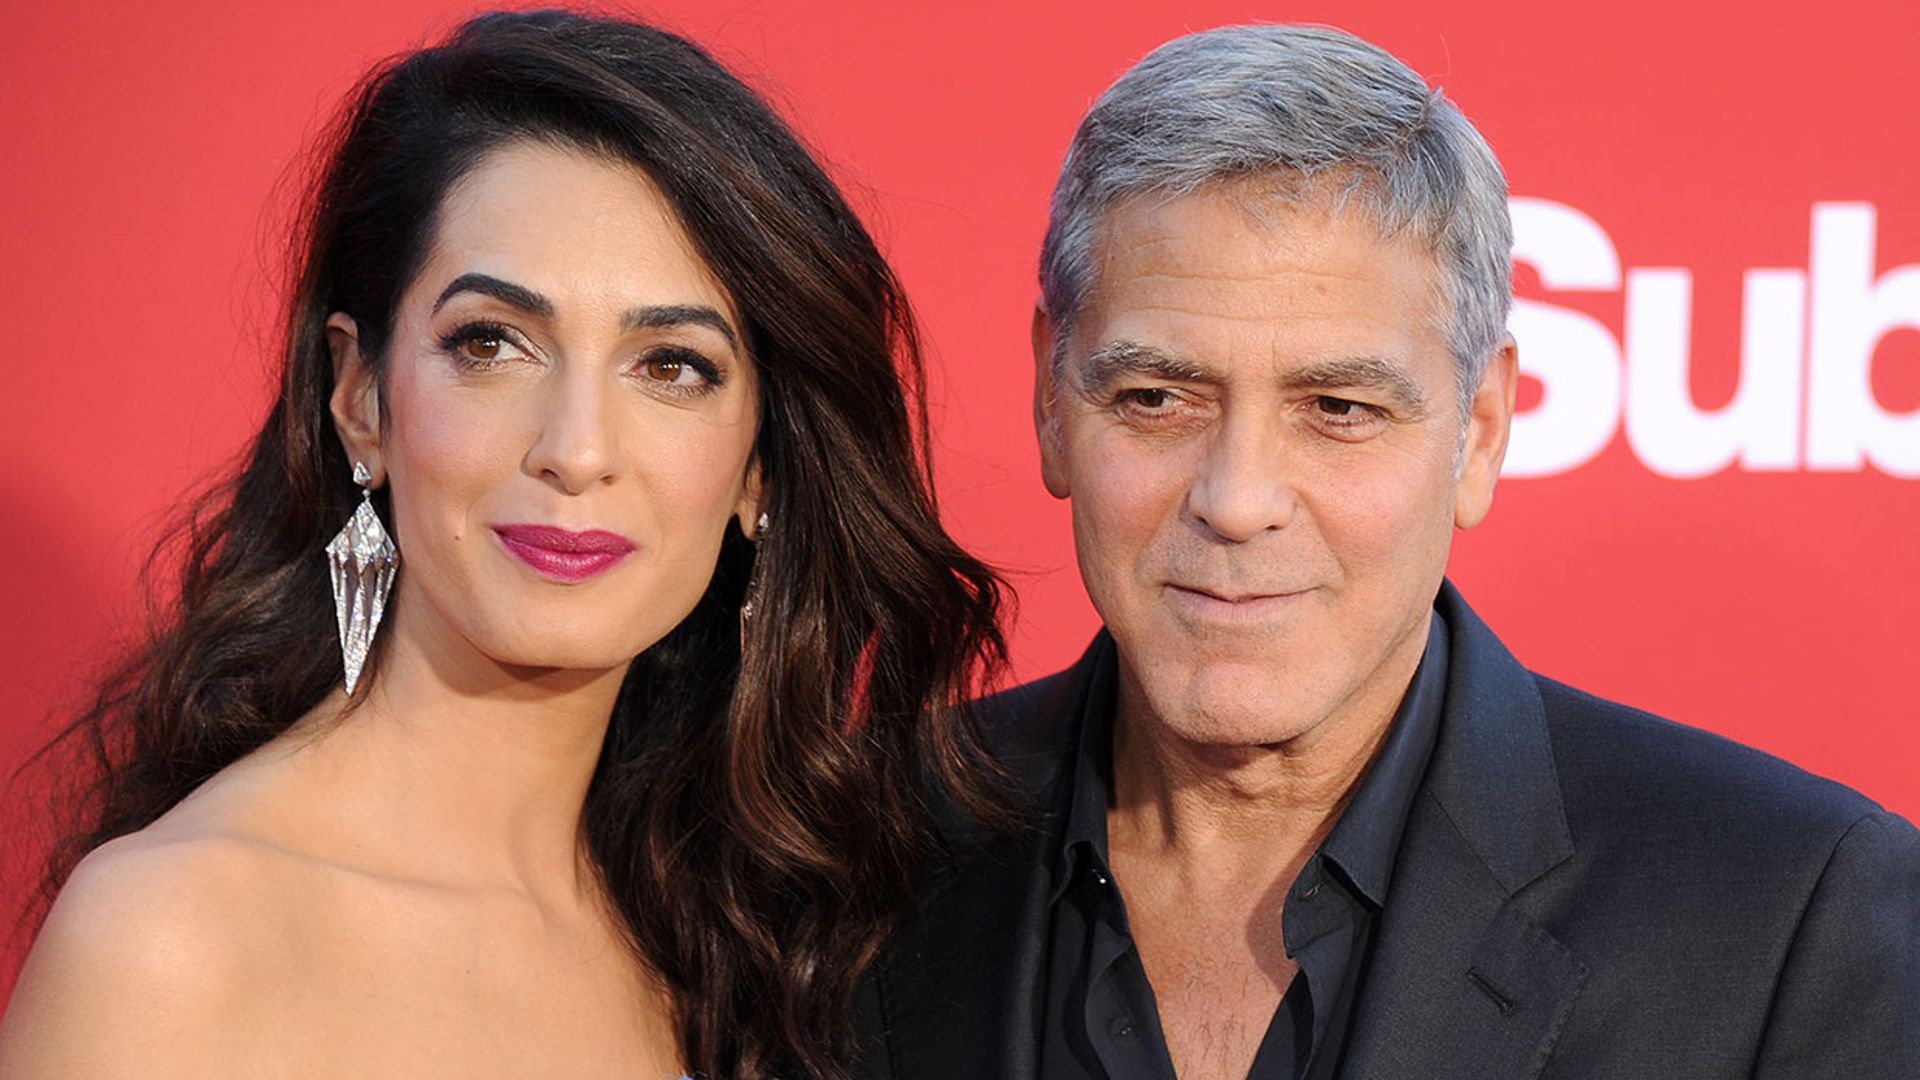 GEORGE AND AMAL CLOONEY WELCOME TWINS